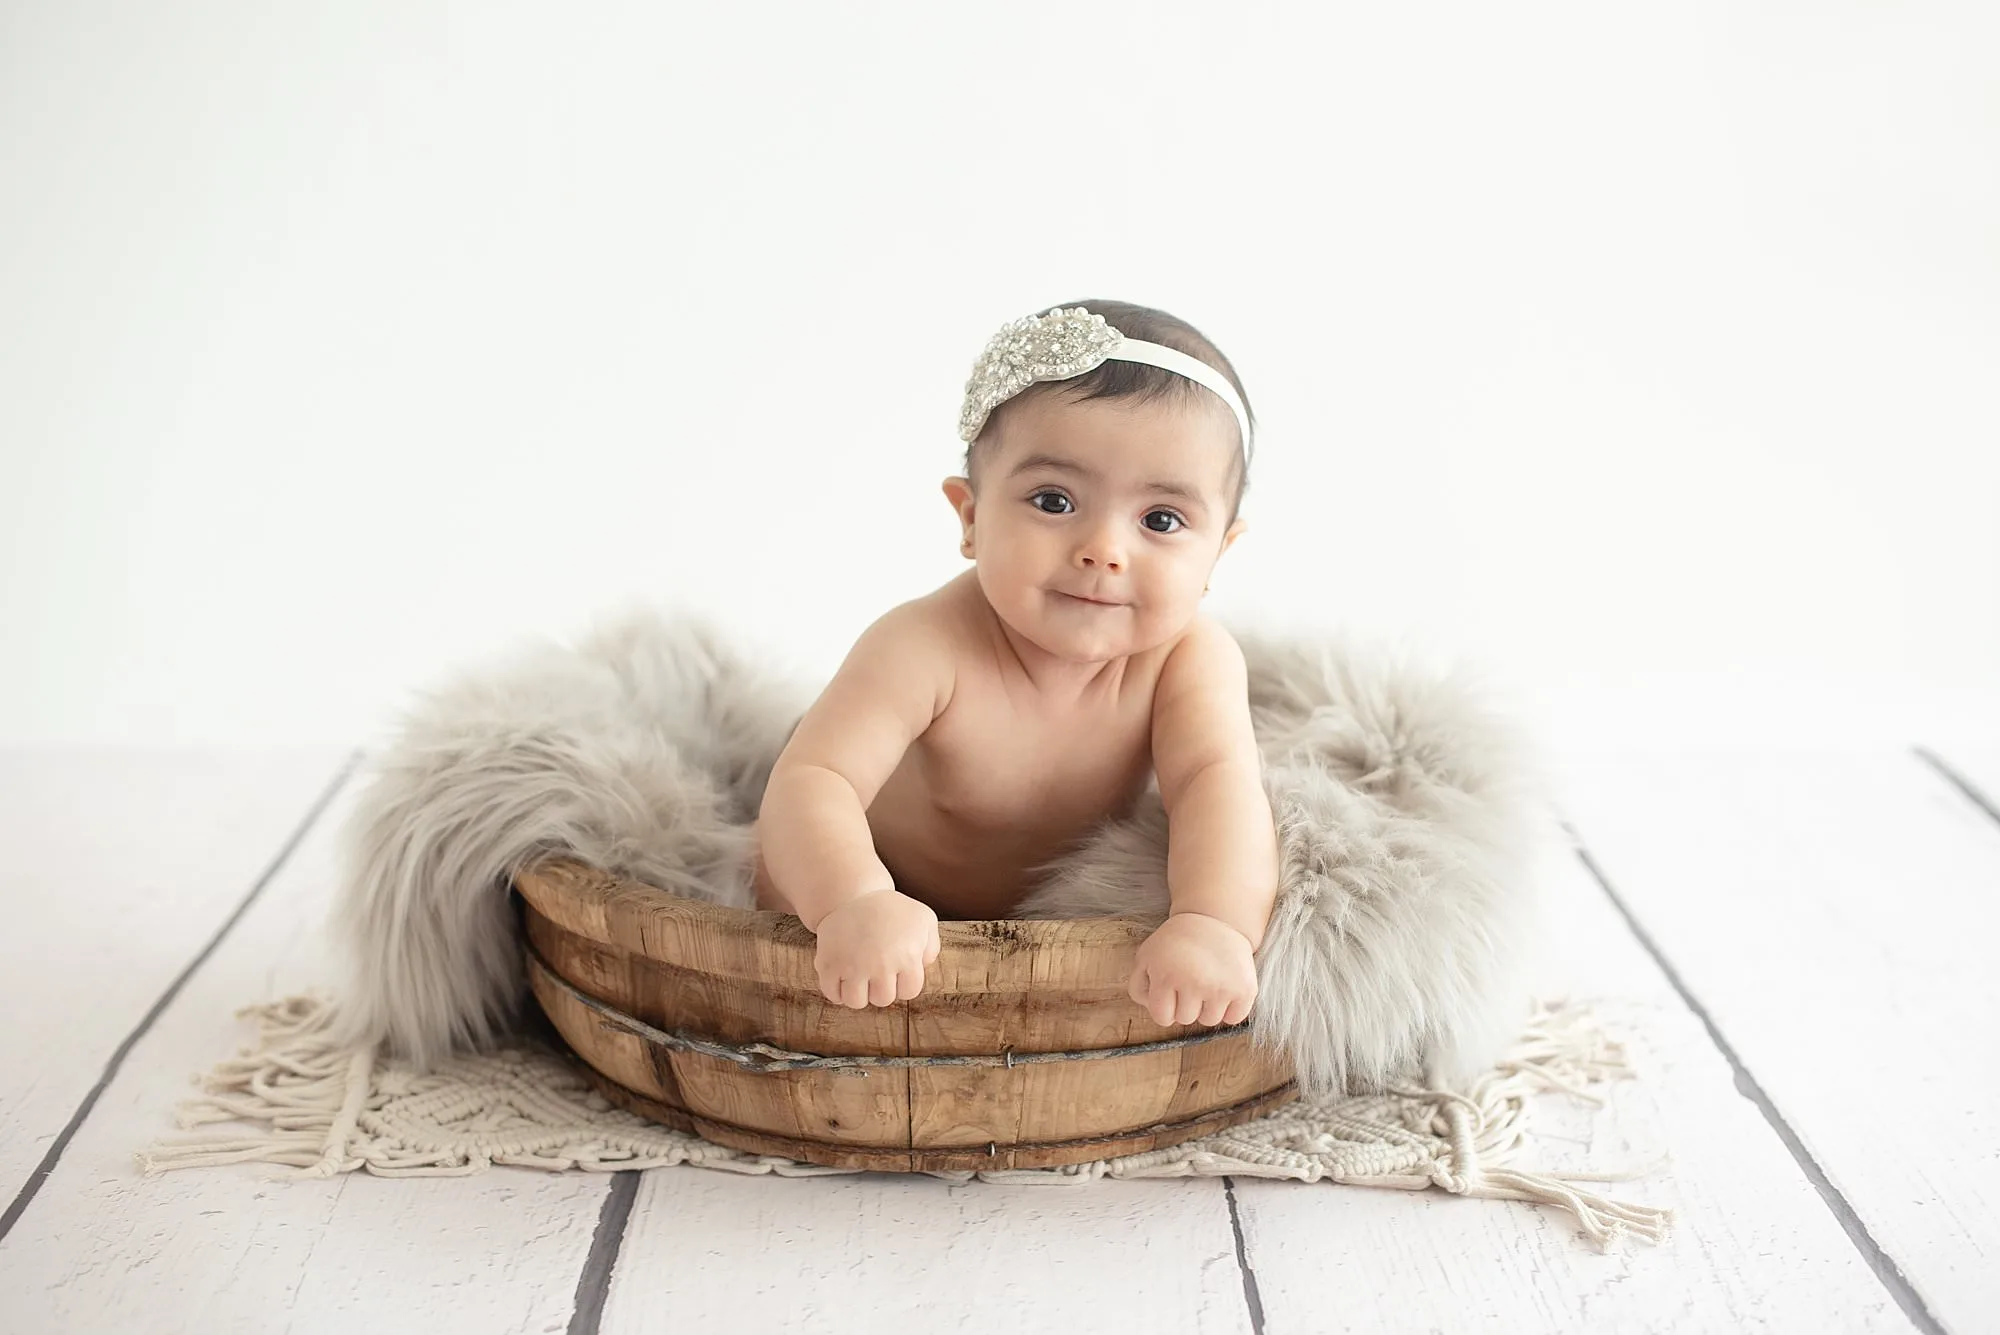 A baby girl sitting in a wooden basket.